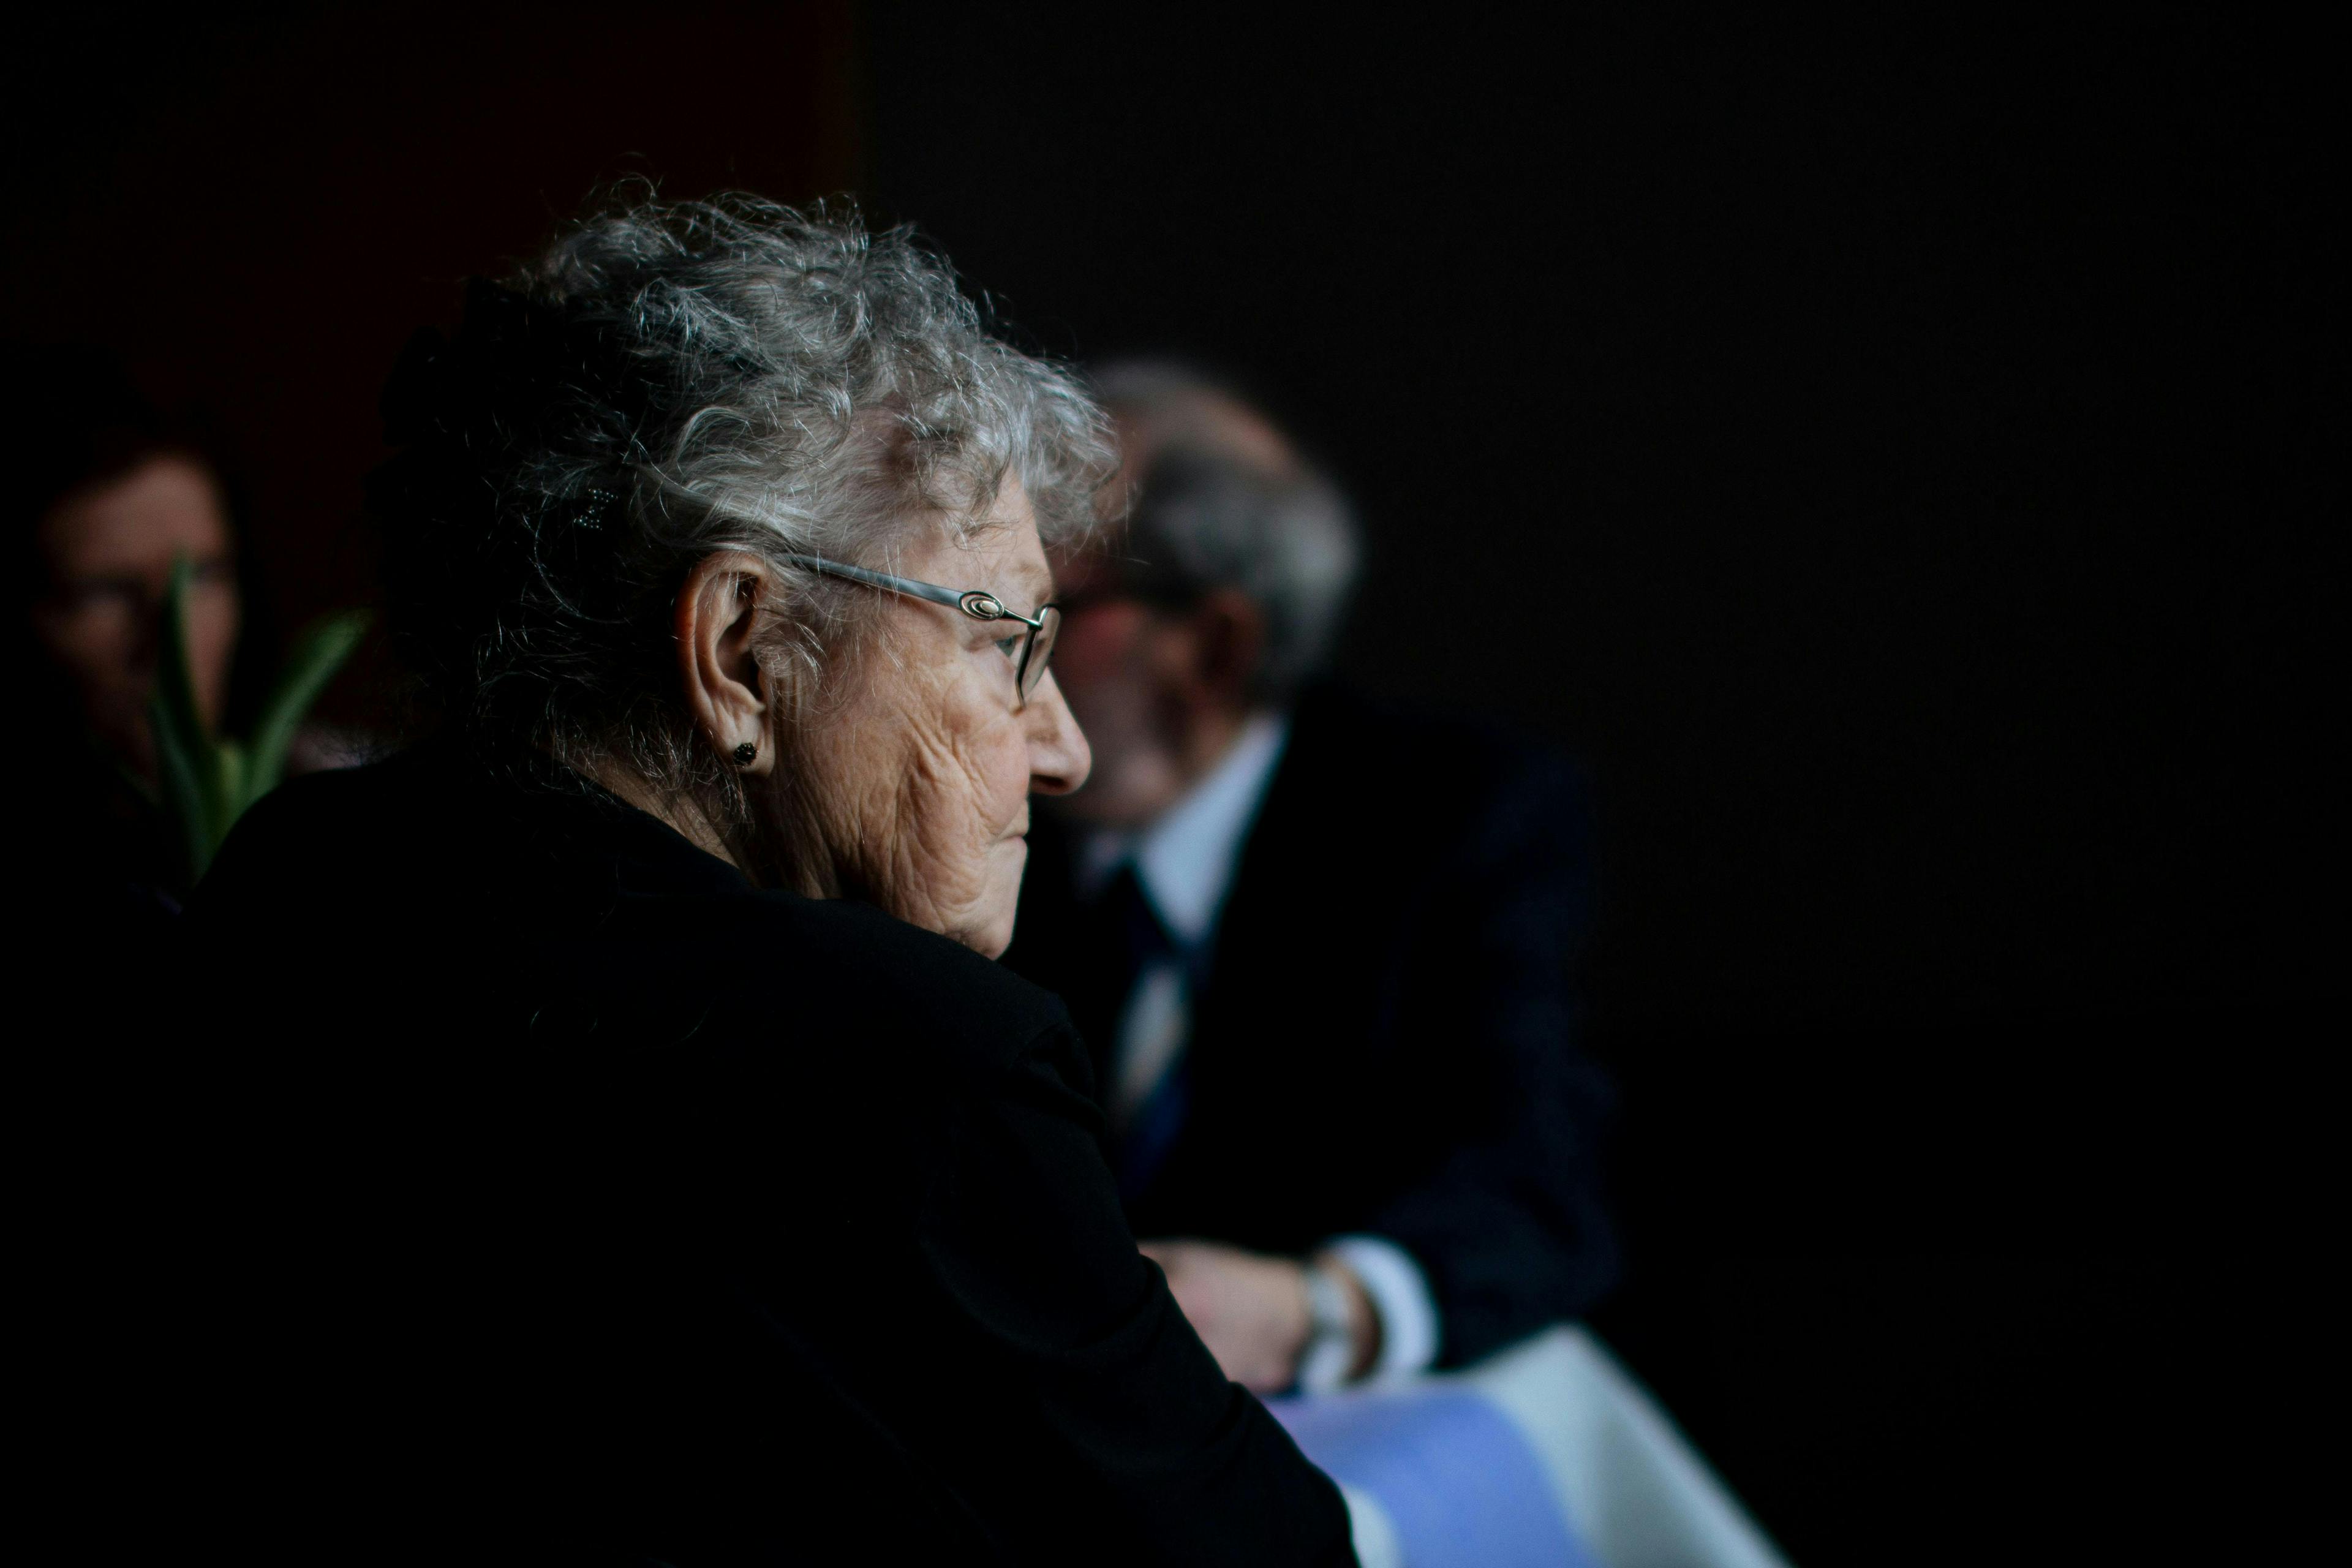 An elderly woman with gray hair and glasses sits in profile, observed in dim lighting, while another person, blurred in the background, sits at a table.